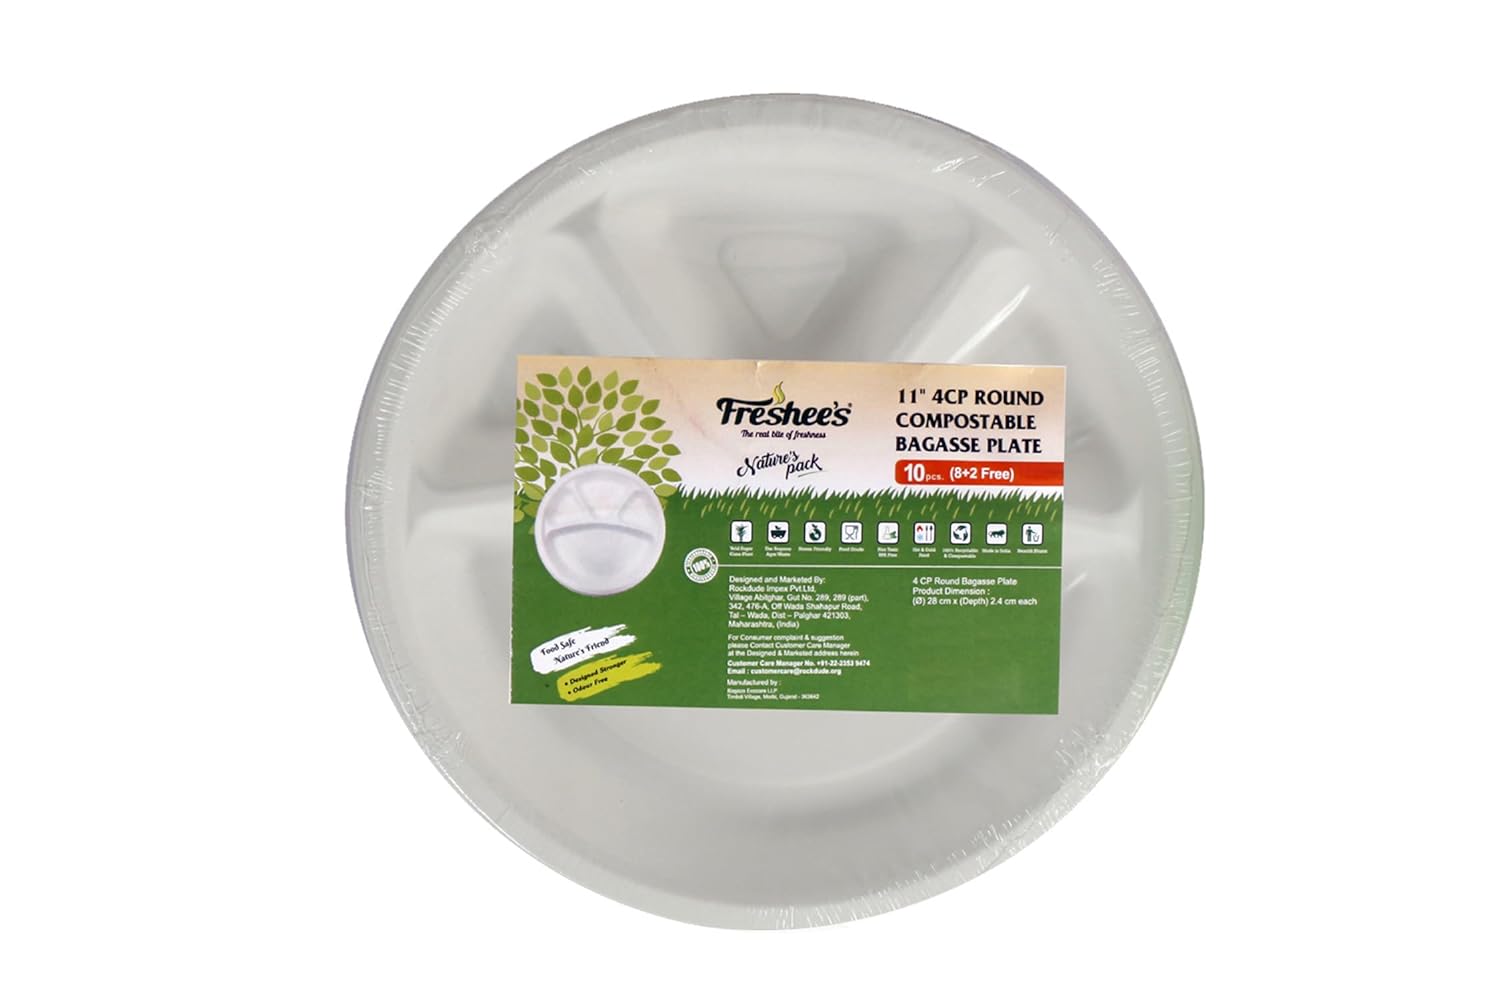 Freshee 4CP Round Compostable Bagasse plate(2)